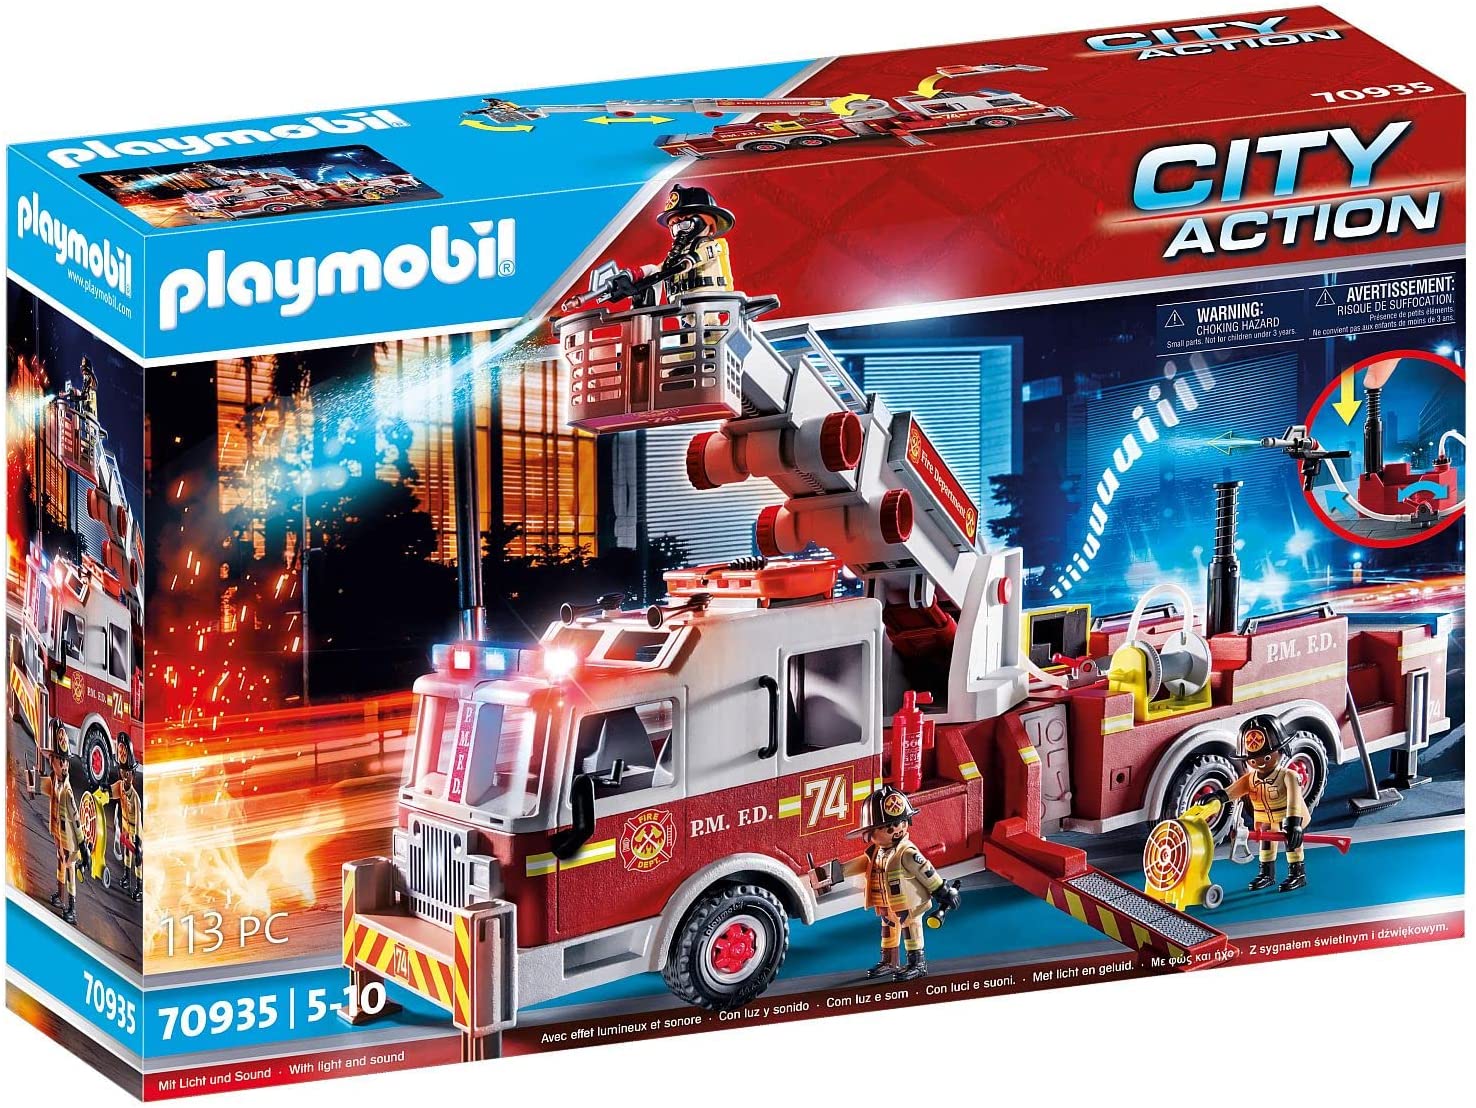 PLAYMOBIL City Action 70935 Fire Engine US Tower Ladder with Light and Sound Toy for Children from 5 Years